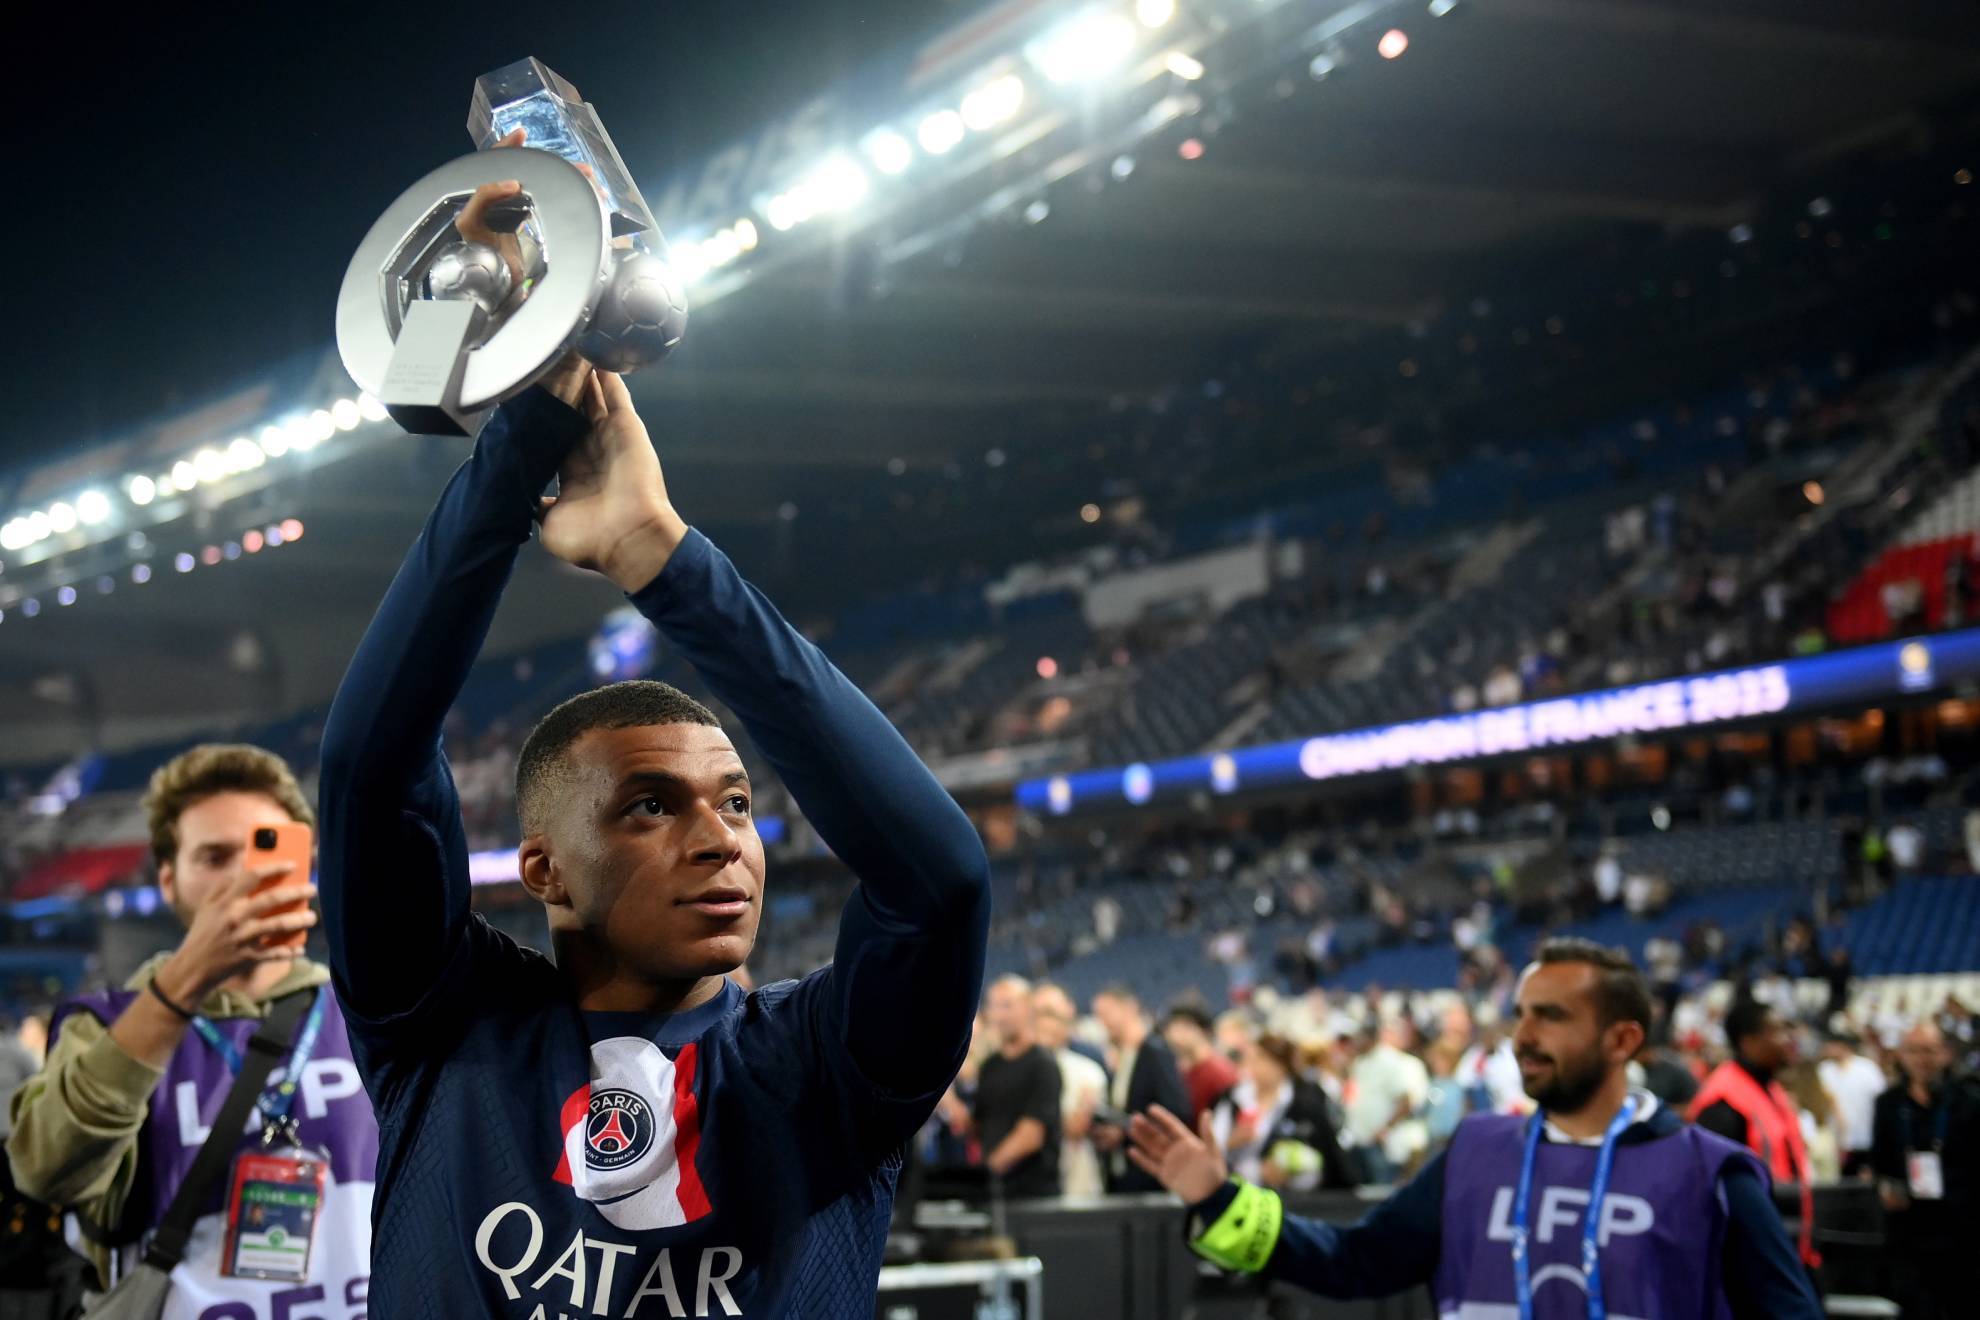 Mbappe breaks his silence: I have already said that I will continue next season at PSG where I am very happy